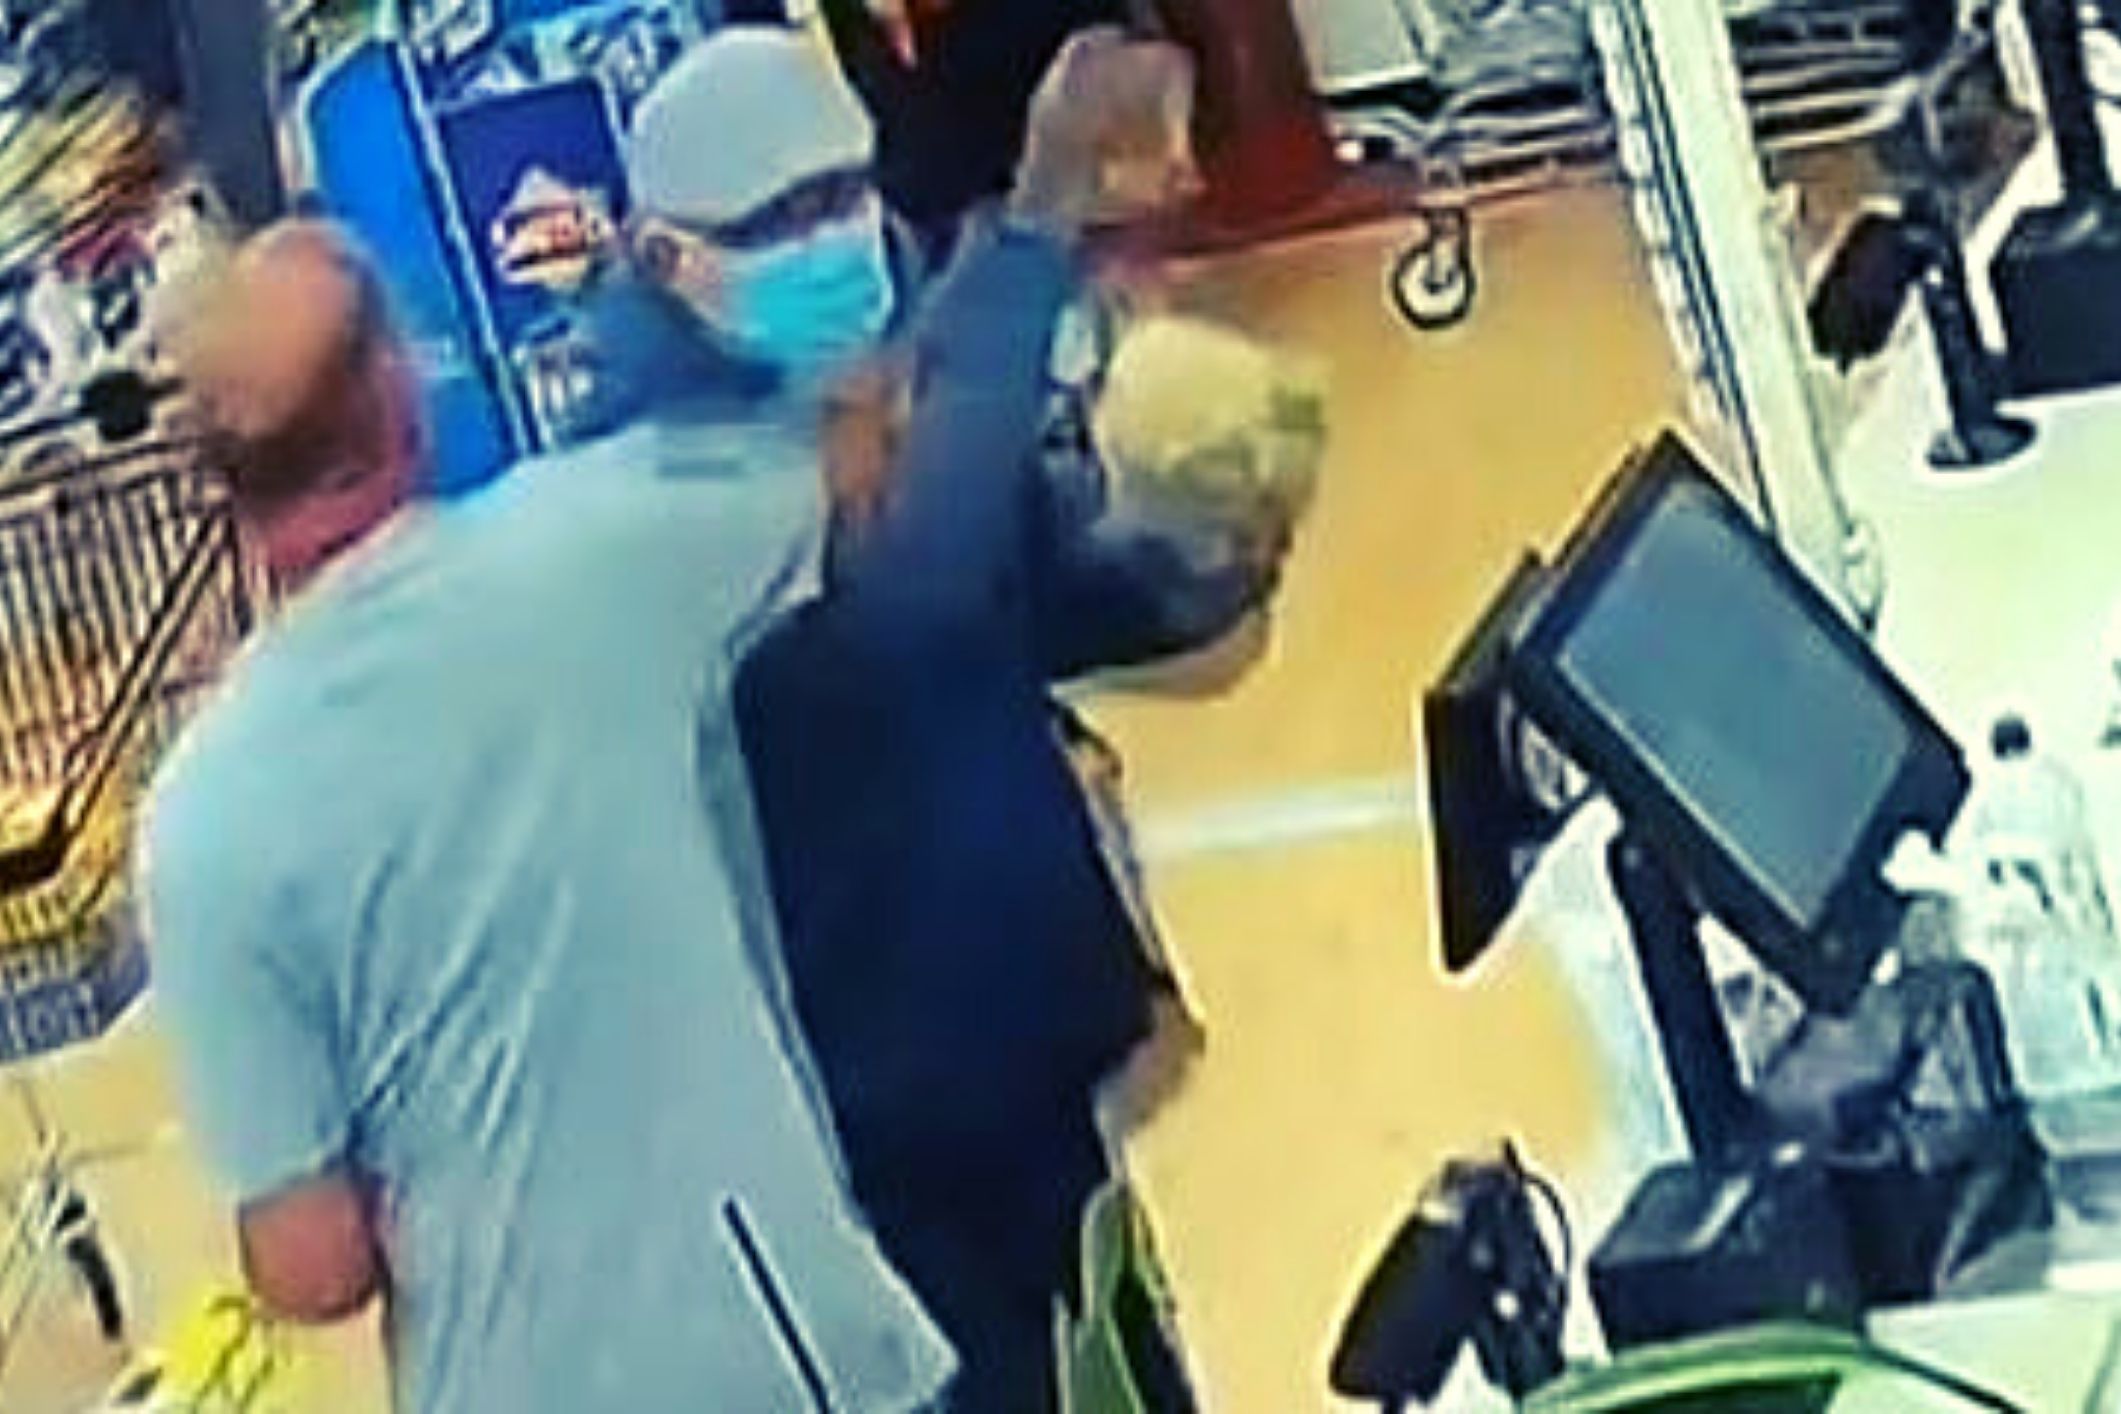 Man refusing to wear a mask pushes elderly shopper to the ground in Adelaide supermarket